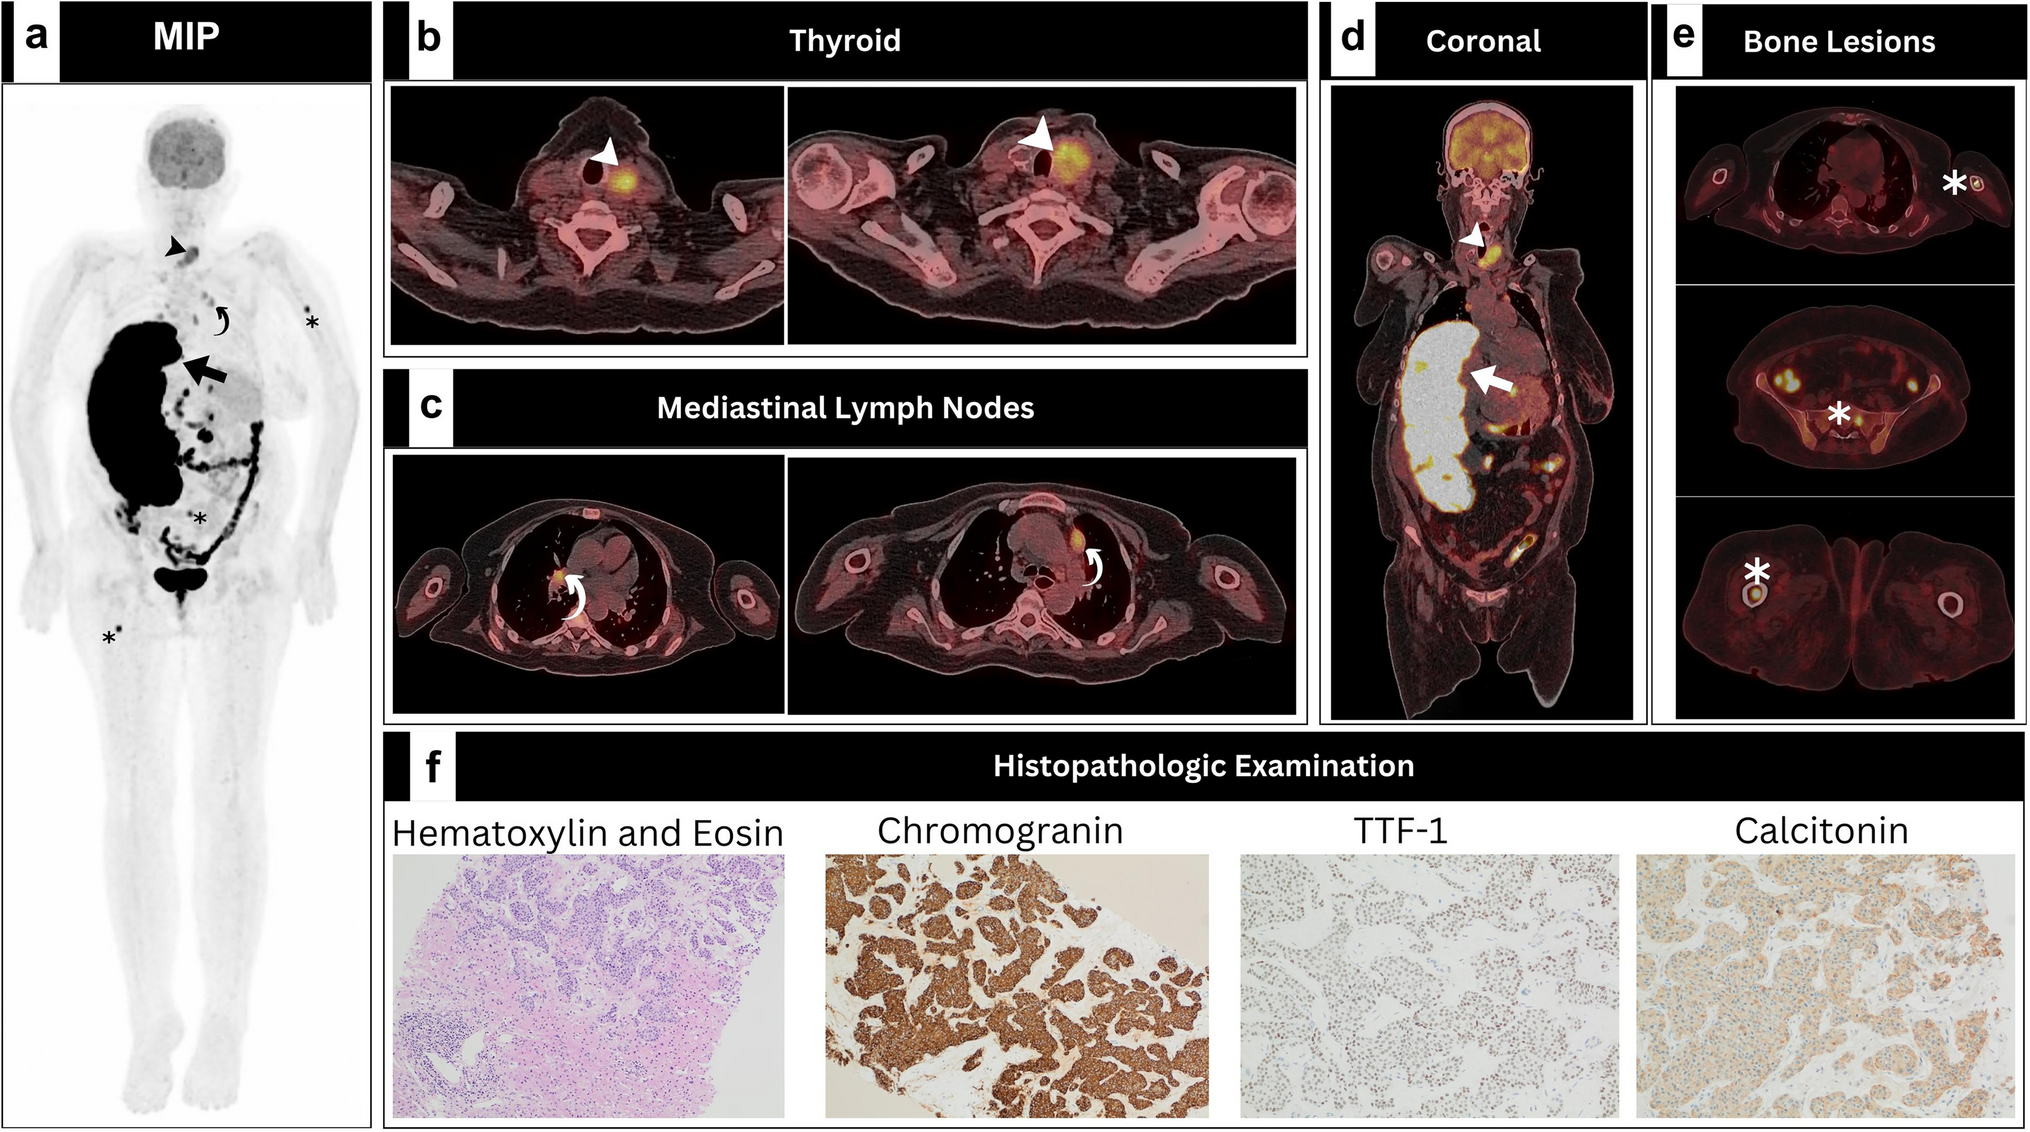 Hepatic Superscan in Medullary Thyroid Carcinoma: A Rare Presentation in [18F]FDG PET/CT